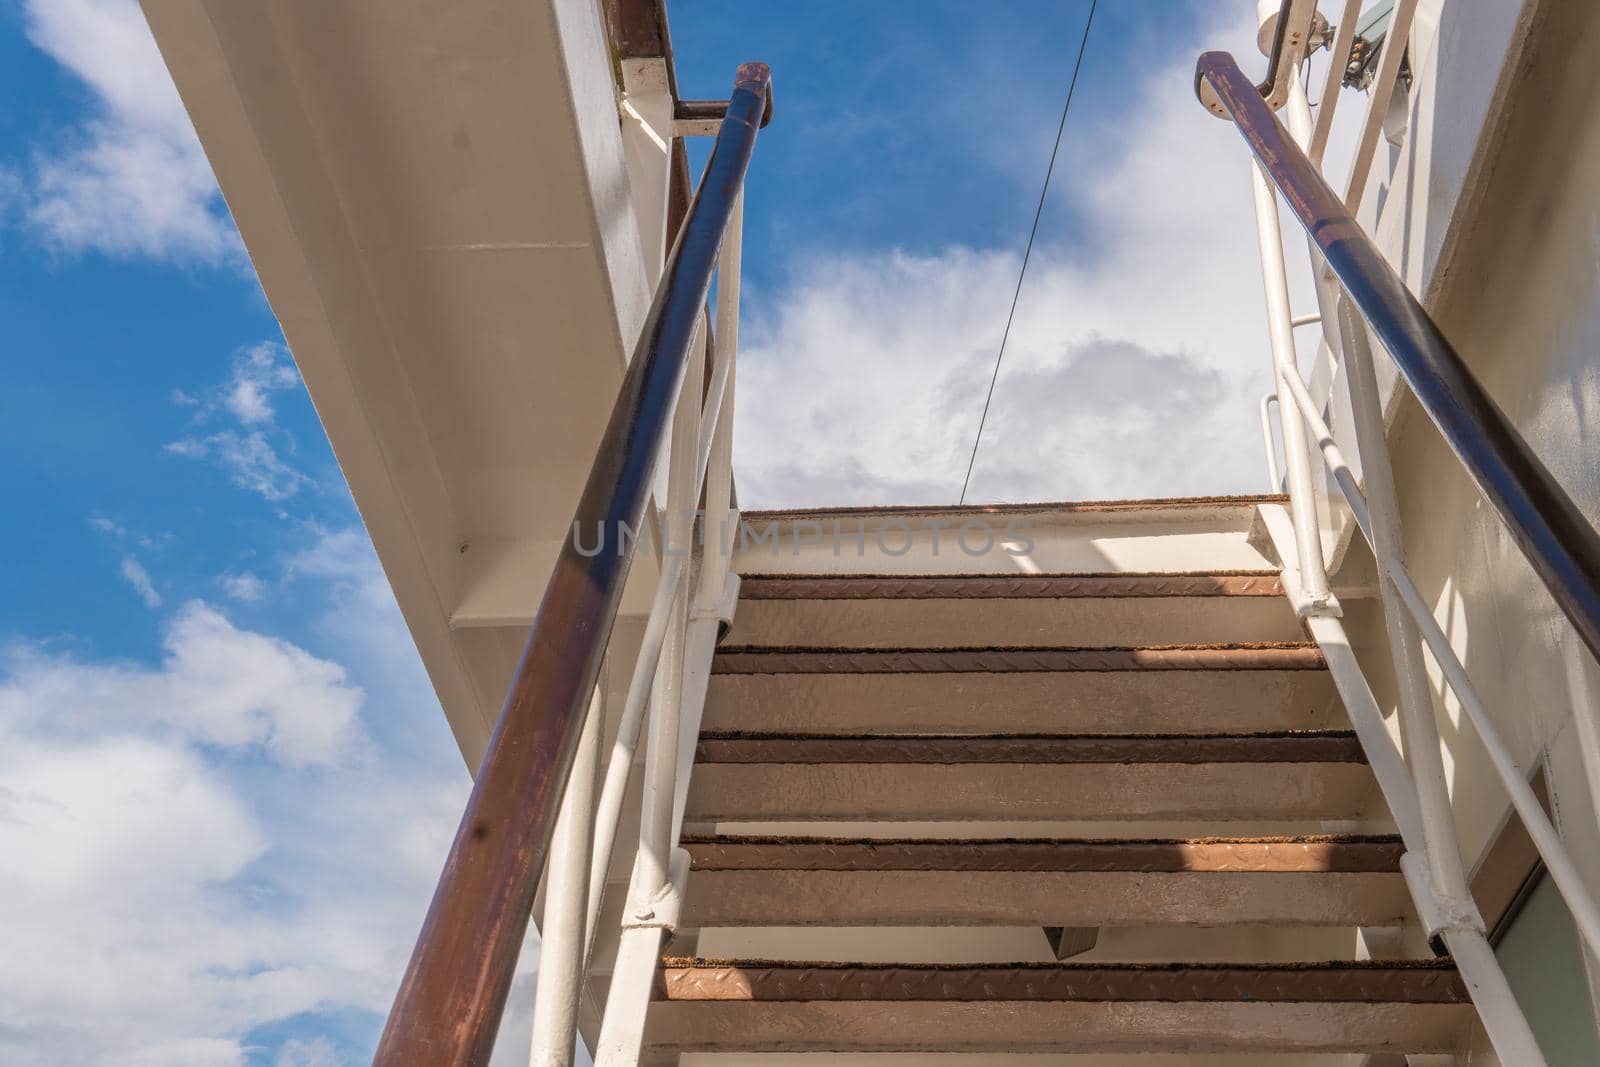 stairs on deck sailing water holiday tourism ransportation boat, sport Bow carnival, 4k tourists seascape cruise liner lifeboat lower deck drone view of the sky